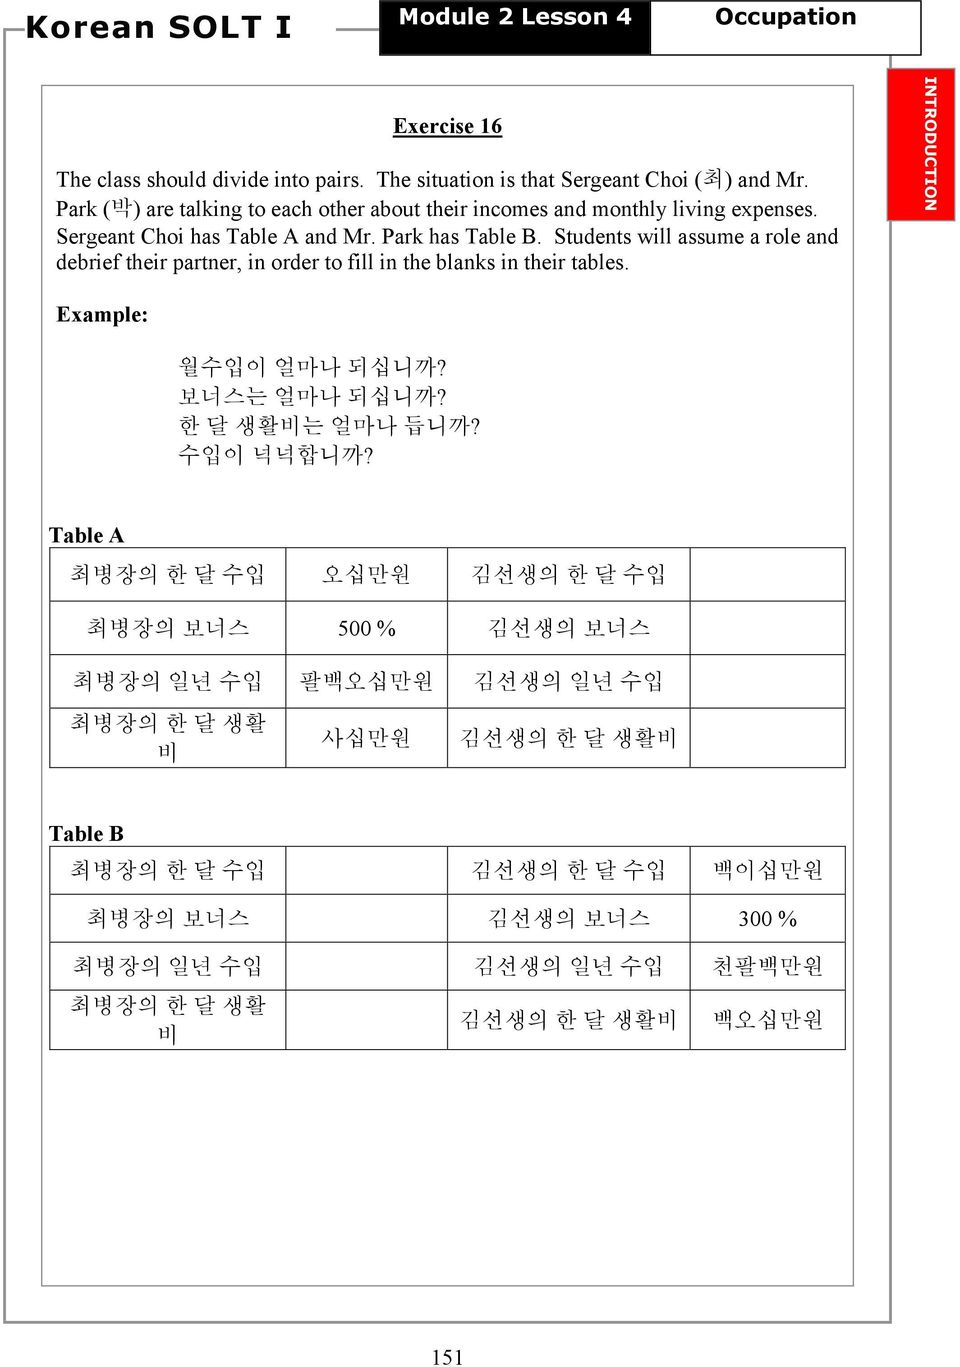 Students will assume a role and debrief their partner, in order to fill in the blanks in their tables. INTRODUCTION Example: 월수입이 얼마나 되십니까? 보너스는 얼마나 되십니까? 한 달 생활비는 얼마나 듭니까?